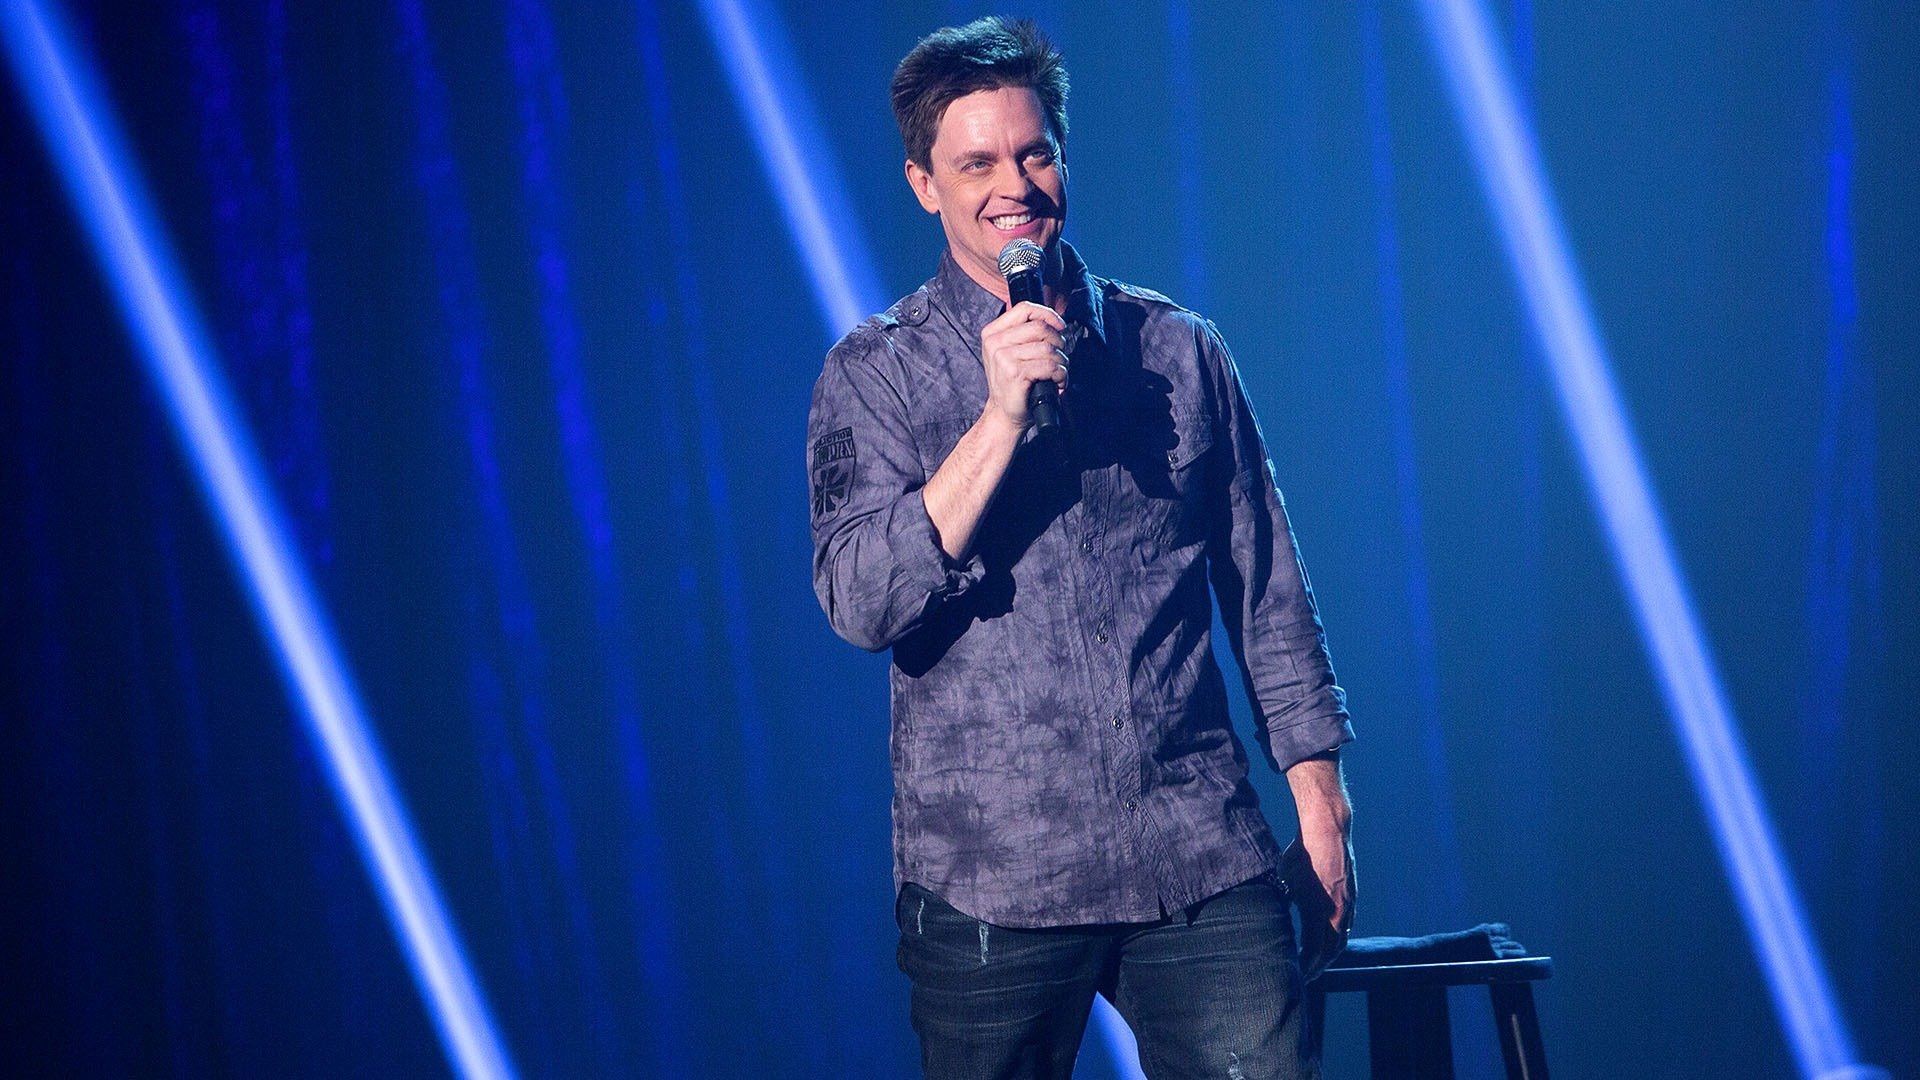 Jim Breuer: And Laughter for All Backdrop